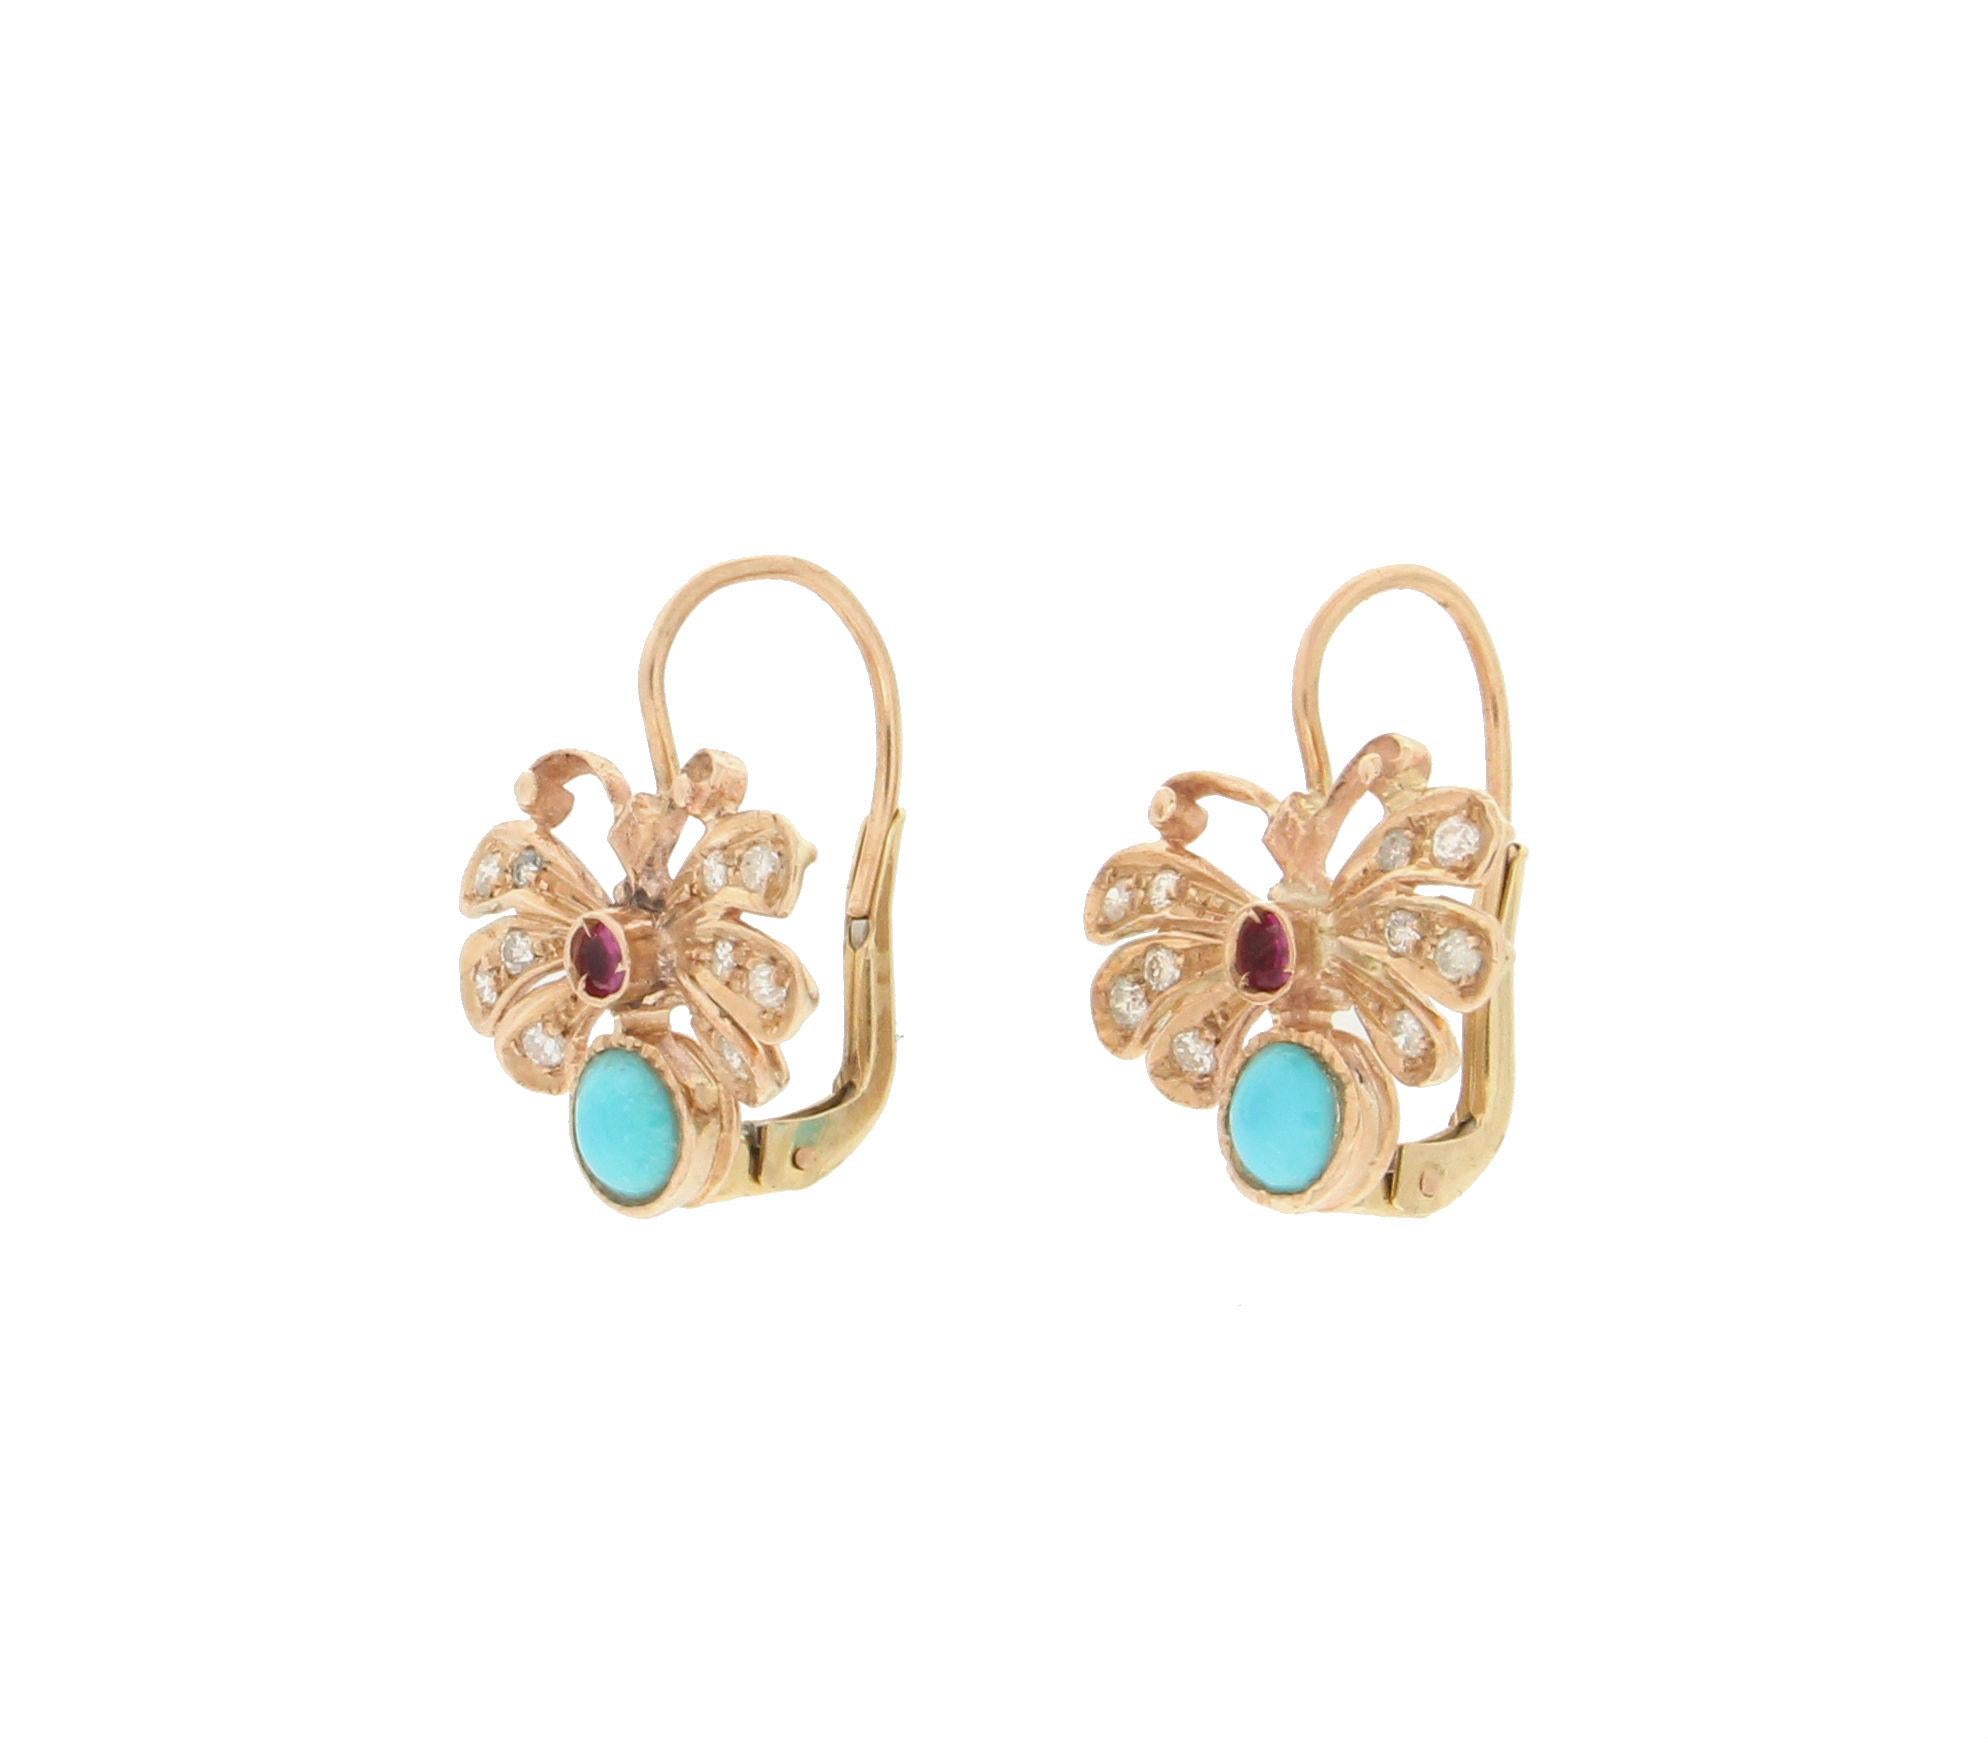 Earrings 14 karat yellow gold depicting a small butterfly, made entirely by hand by our craftsmen.
The butterfly in the world of jewelry is often given as an expression of a love that goes beyond the short life span.
The earring is adorned with